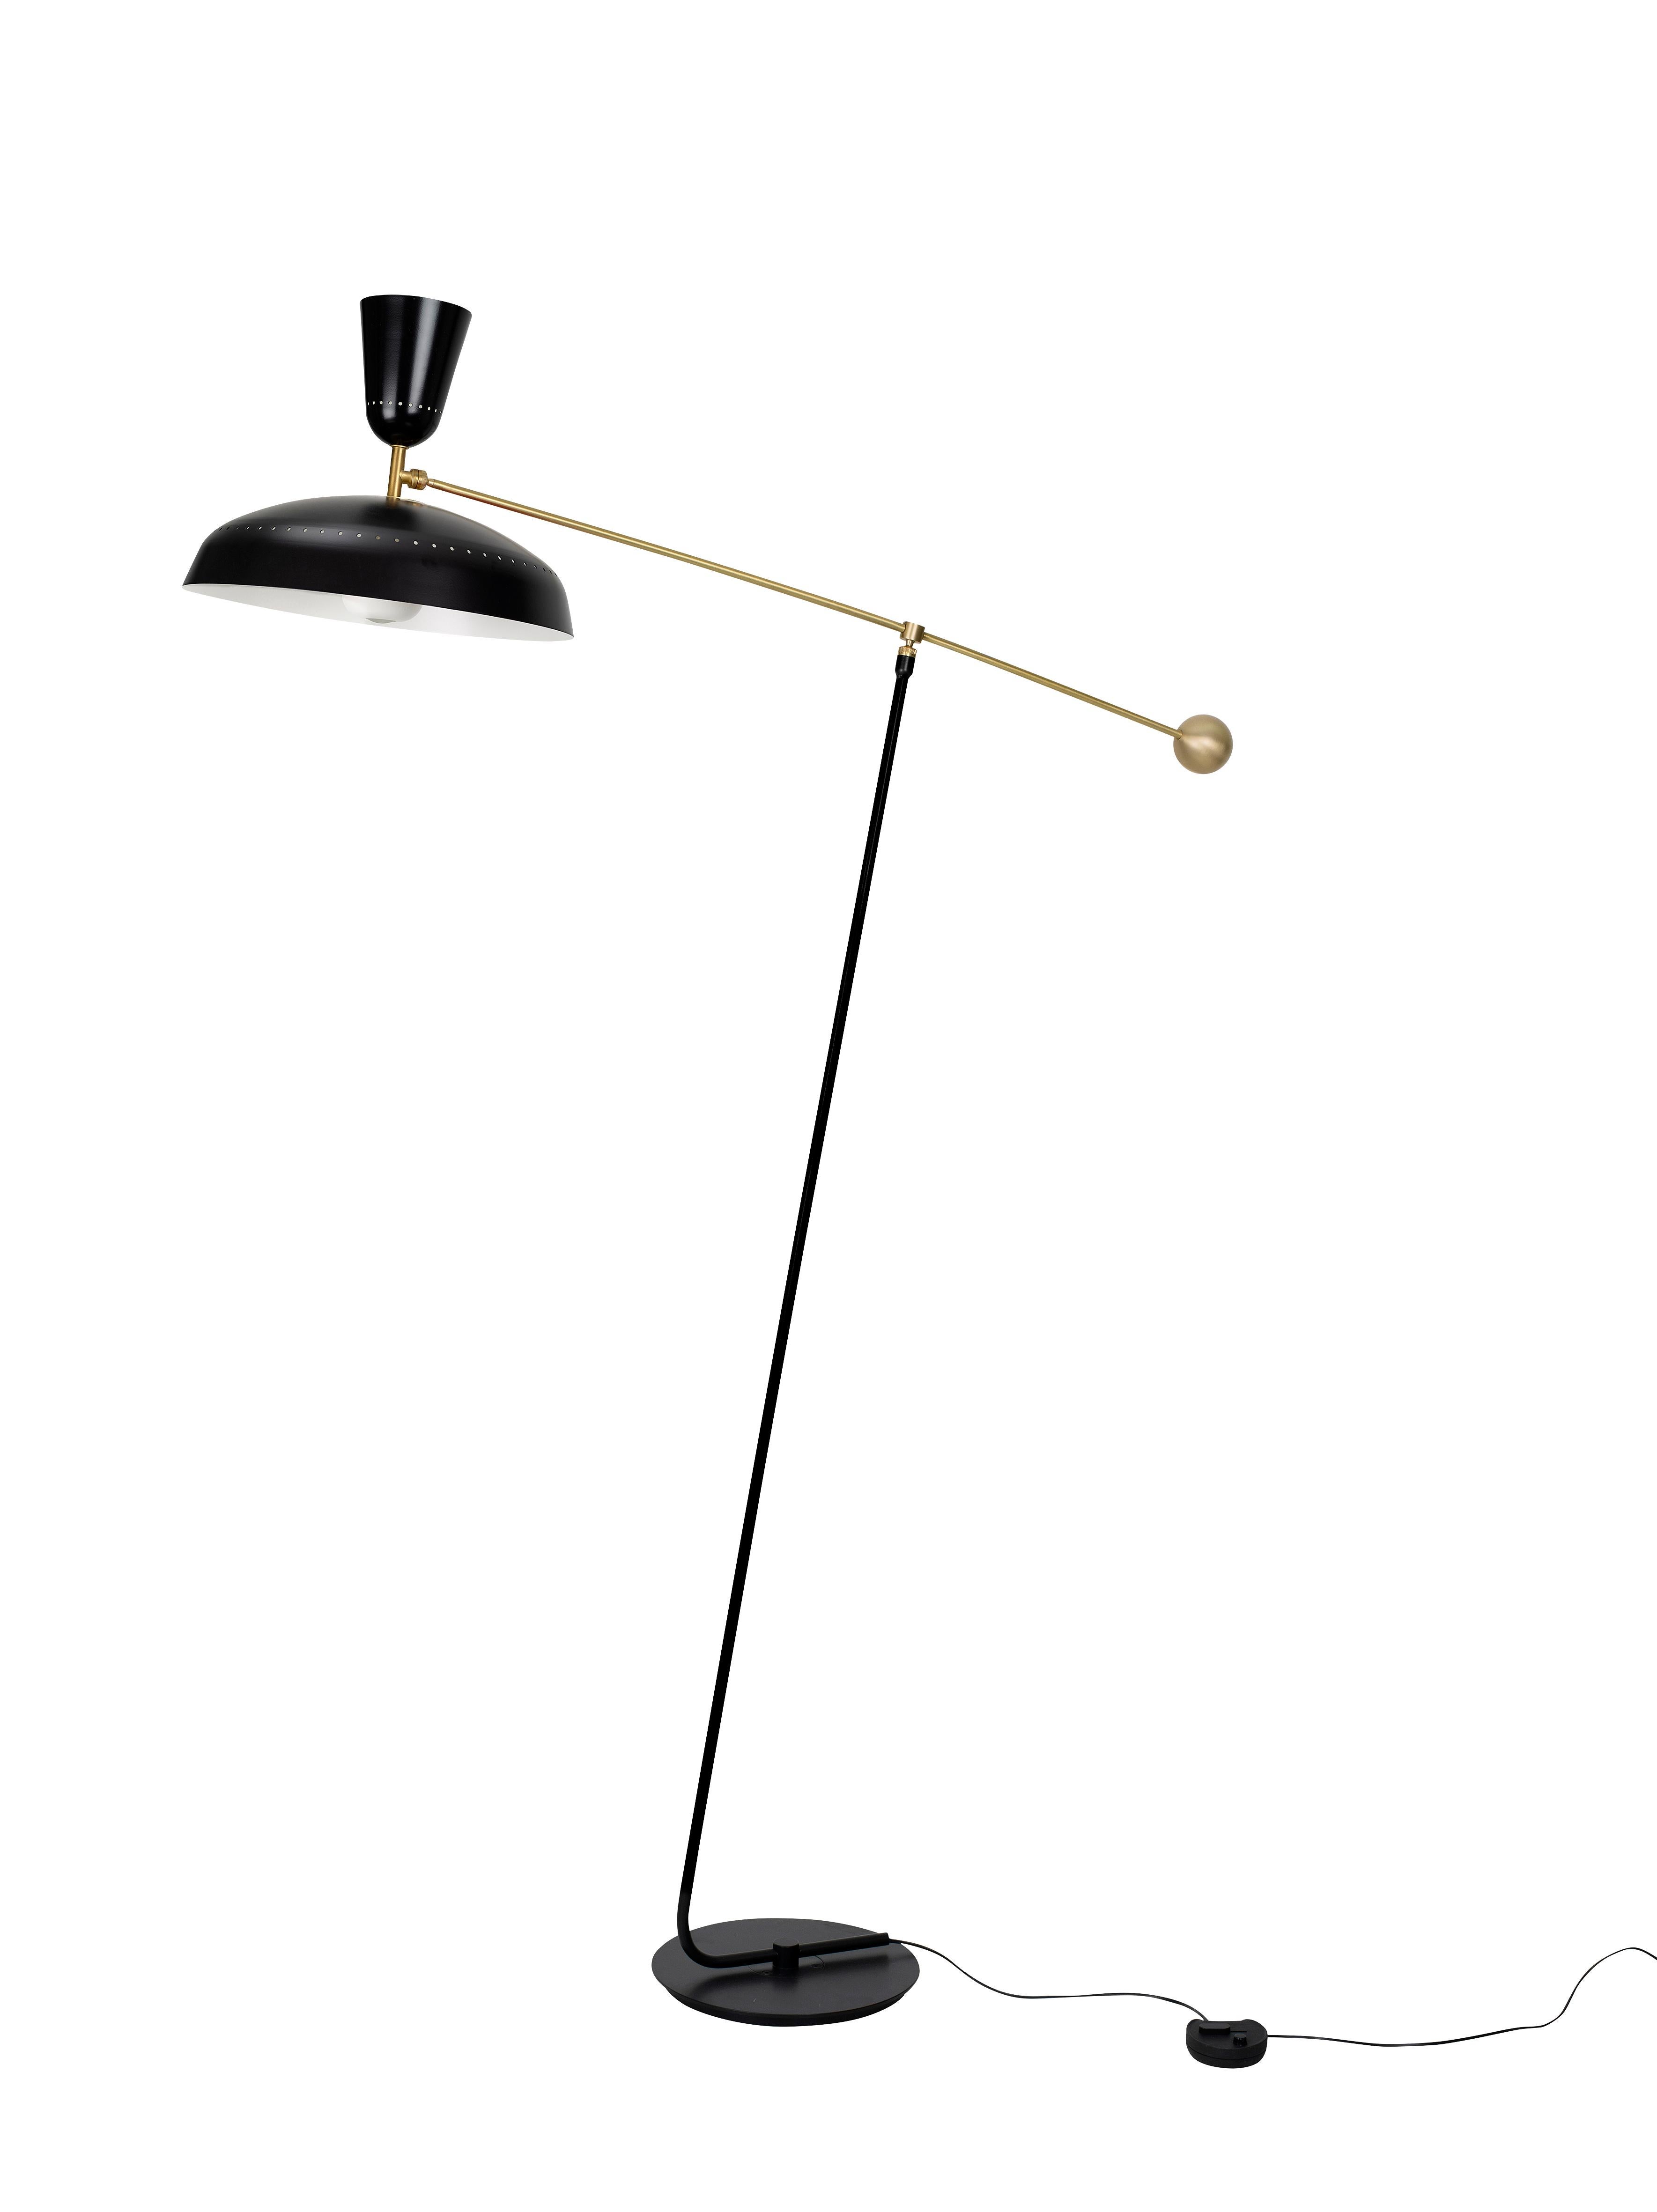 Large Pierre Guariche 'G1' Floor Lamp for Sammode Studio in Green For Sale 4